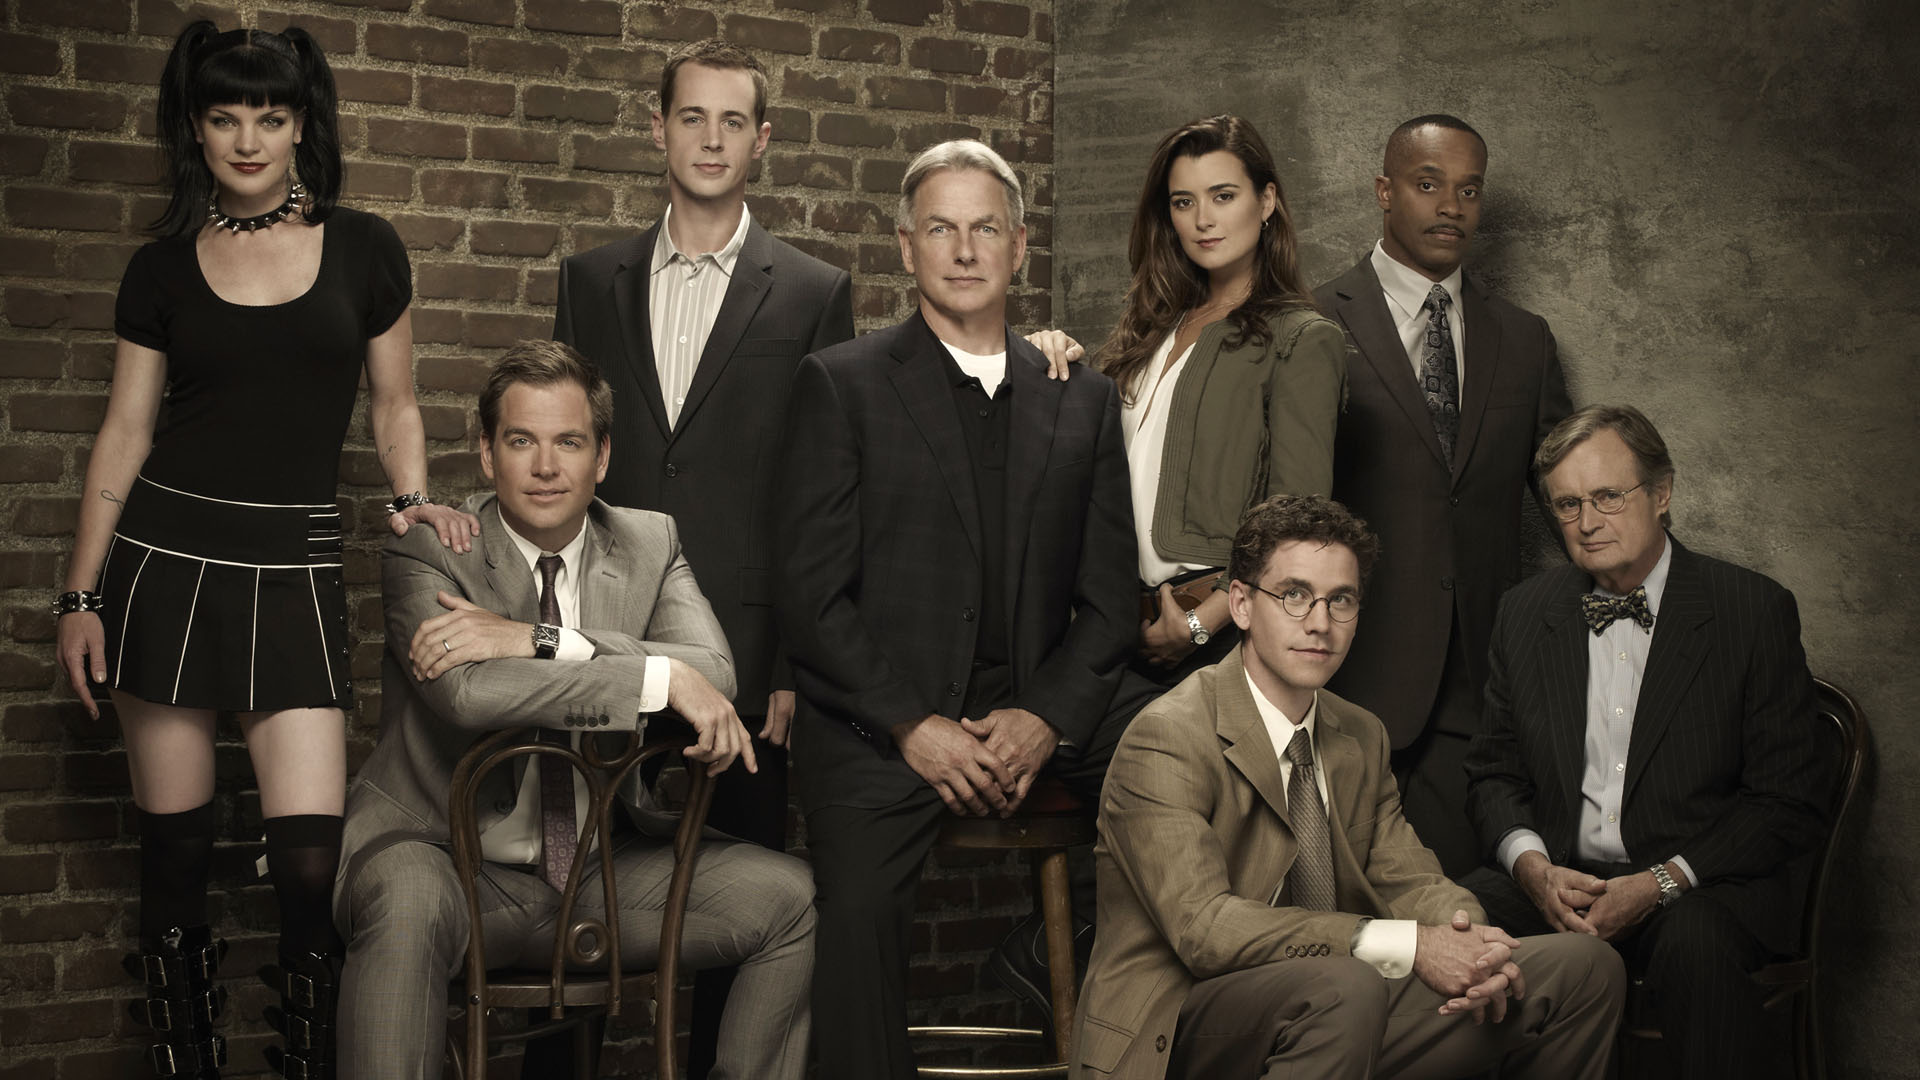 NCIS: Naval Criminal Investigative Service: The most-watched television series in the U.S., Voted America's favorite television show in an online Harris Poll. 1920x1080 Full HD Background.